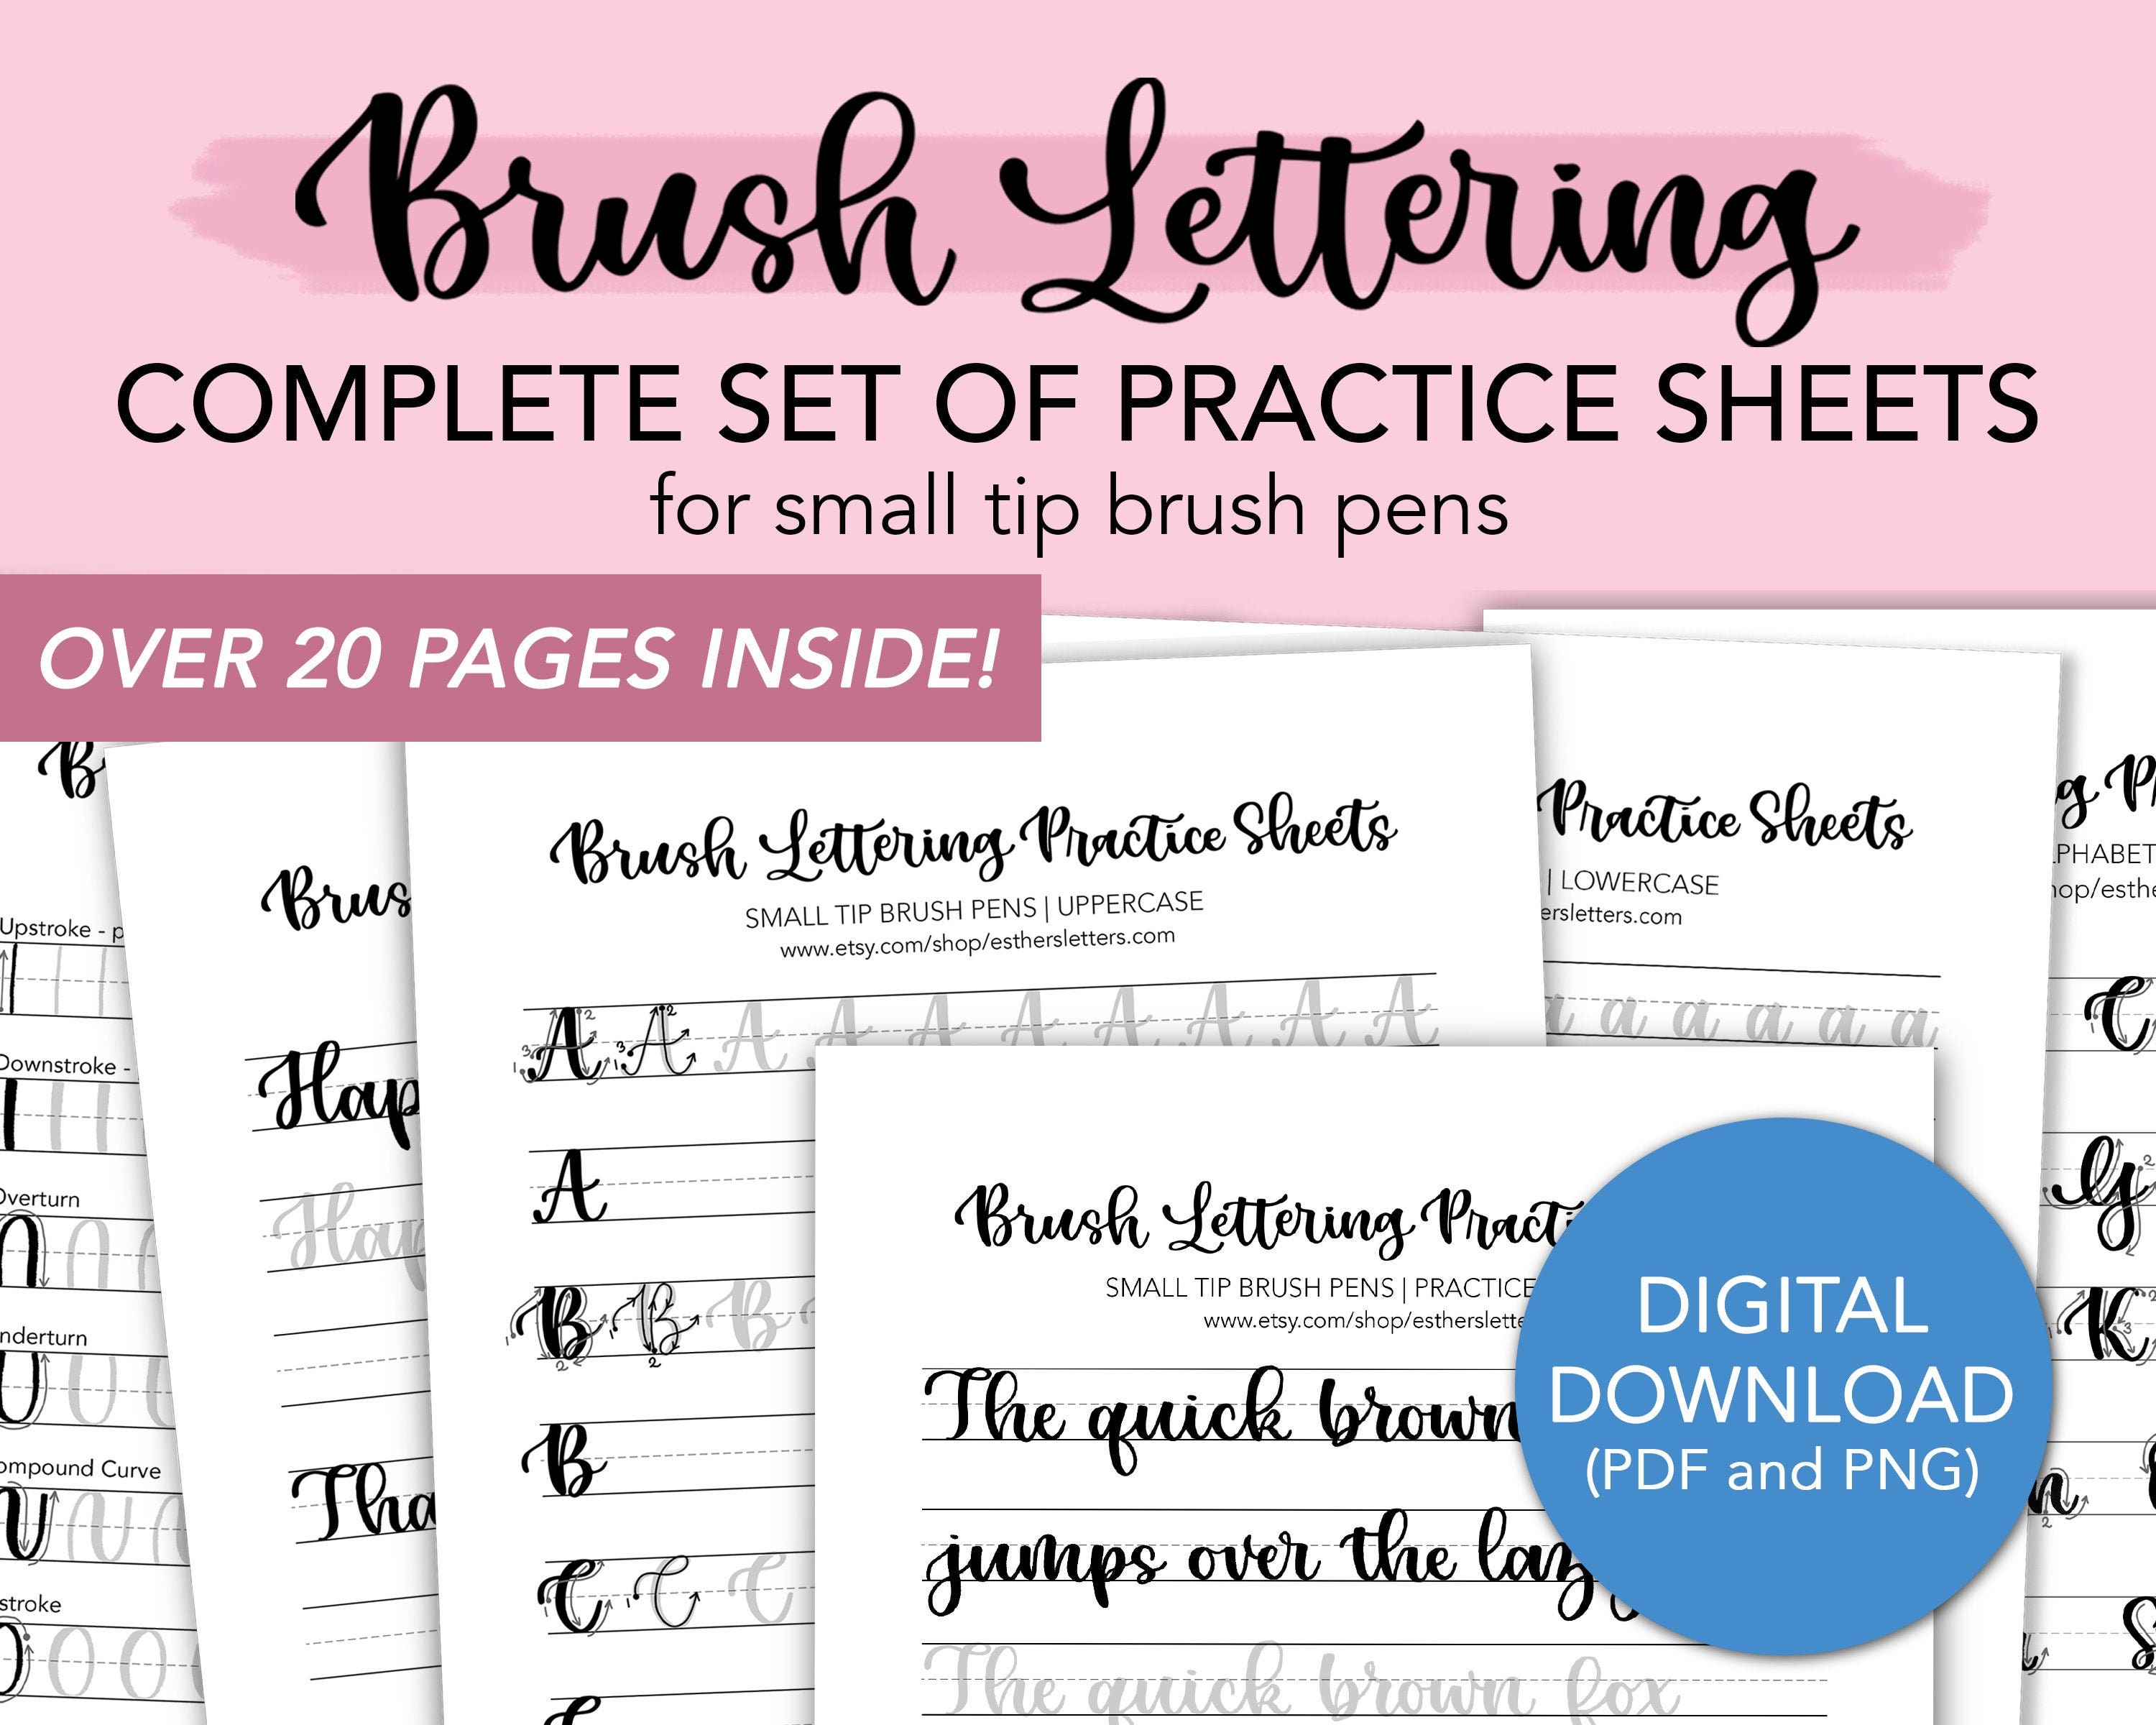 Hand Lettering Guide Sheets